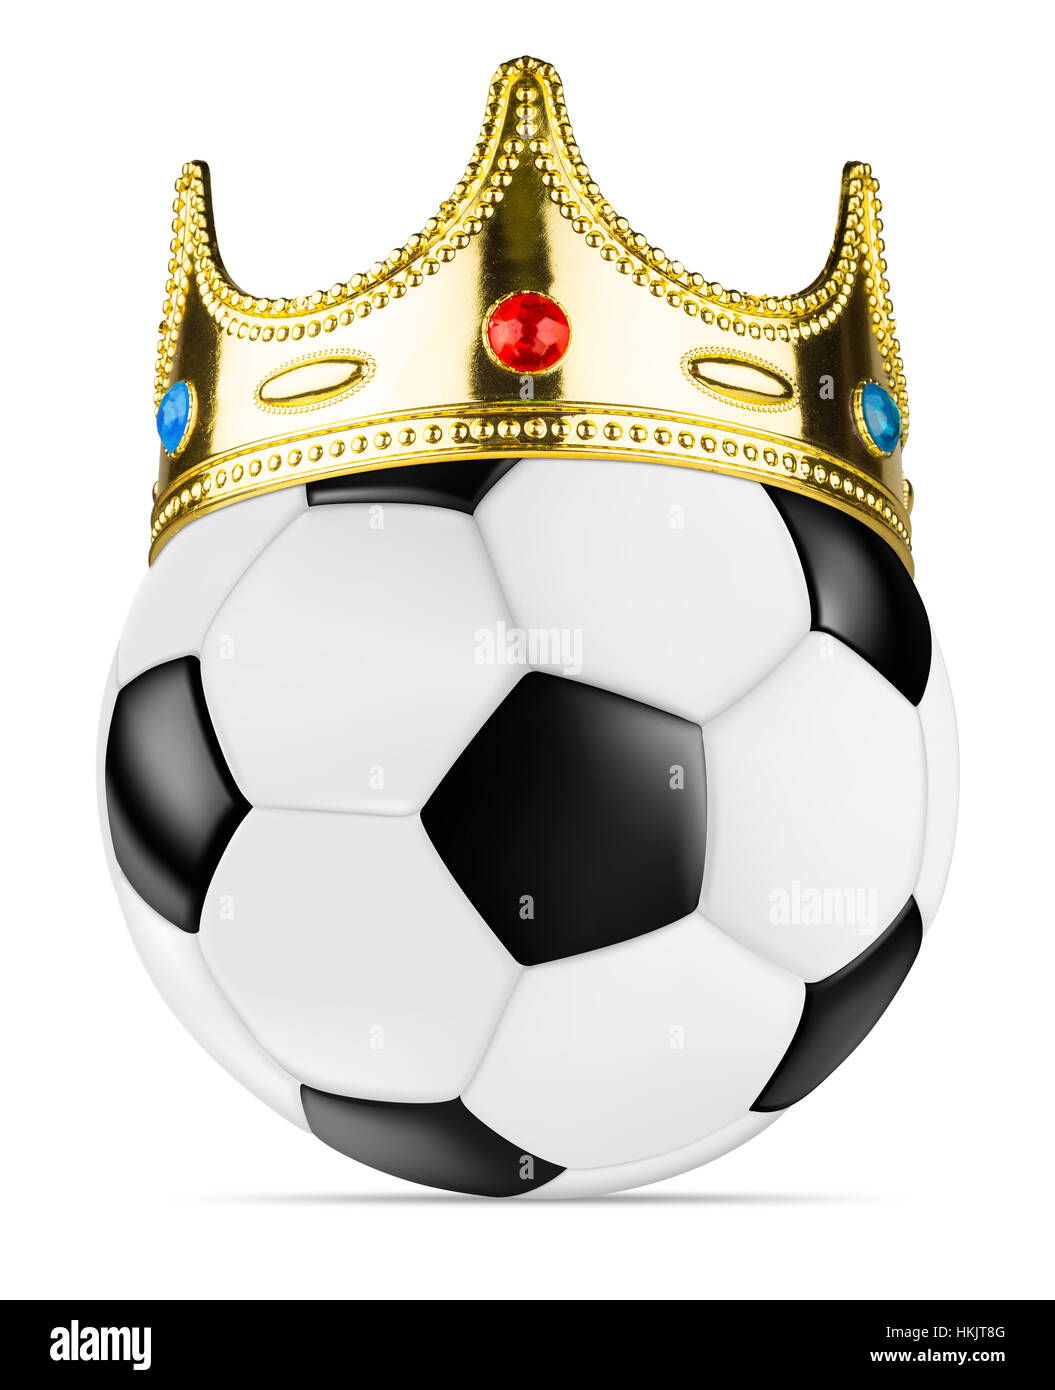 classic retro black white soccer ball winner concept with golden king crown isolated background Stock Photo